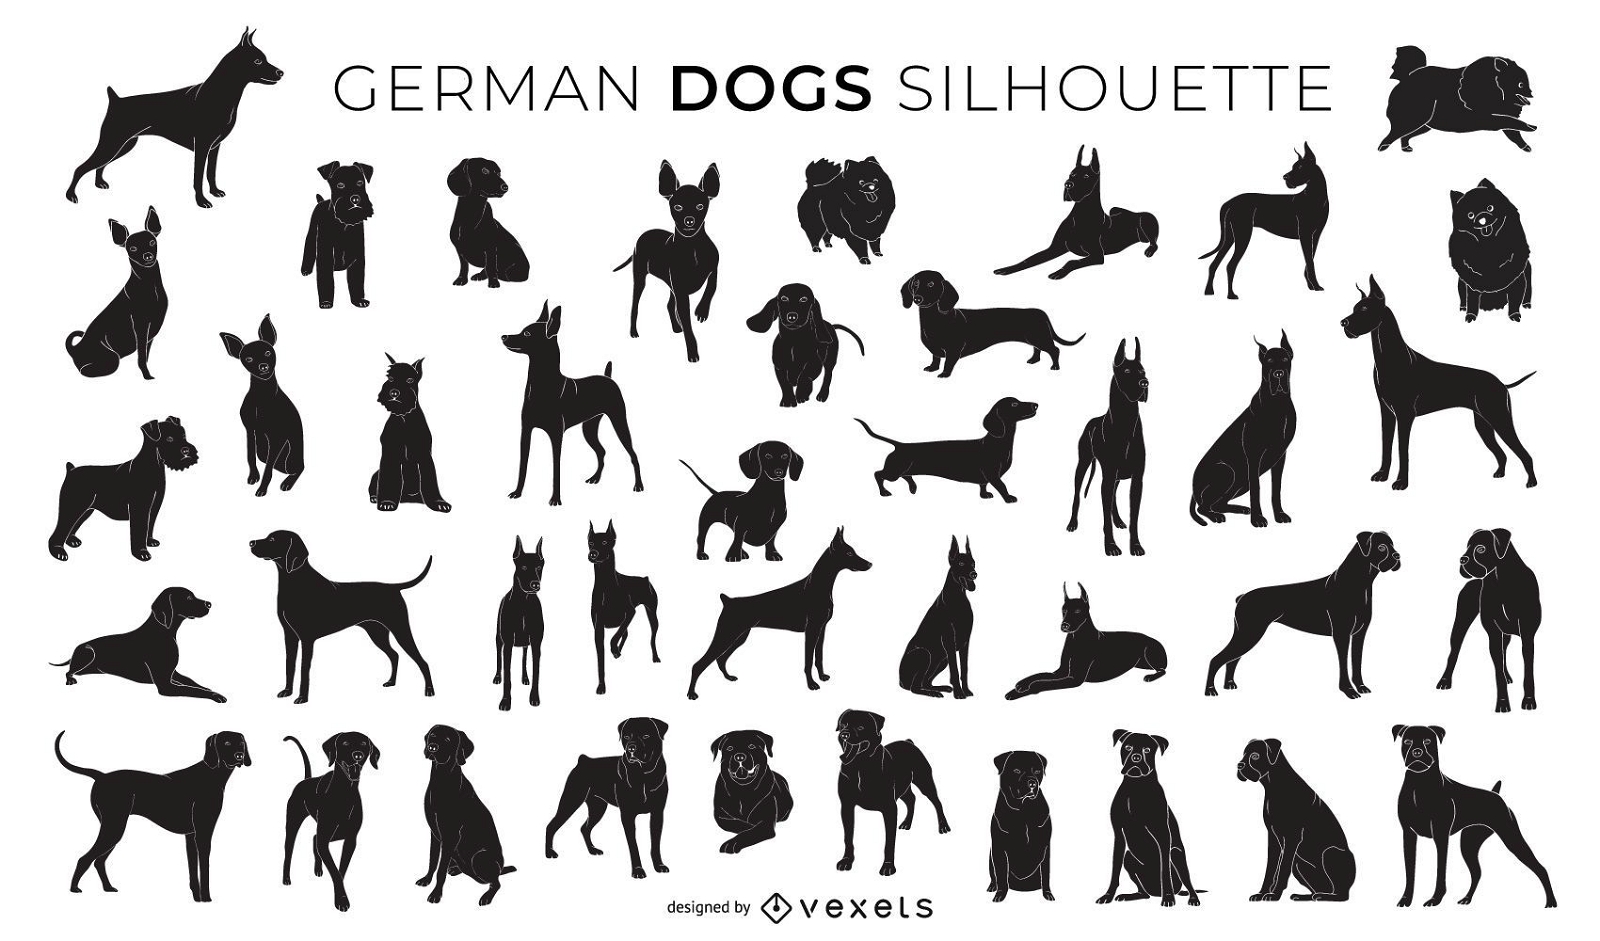 German dogs silhouette collection